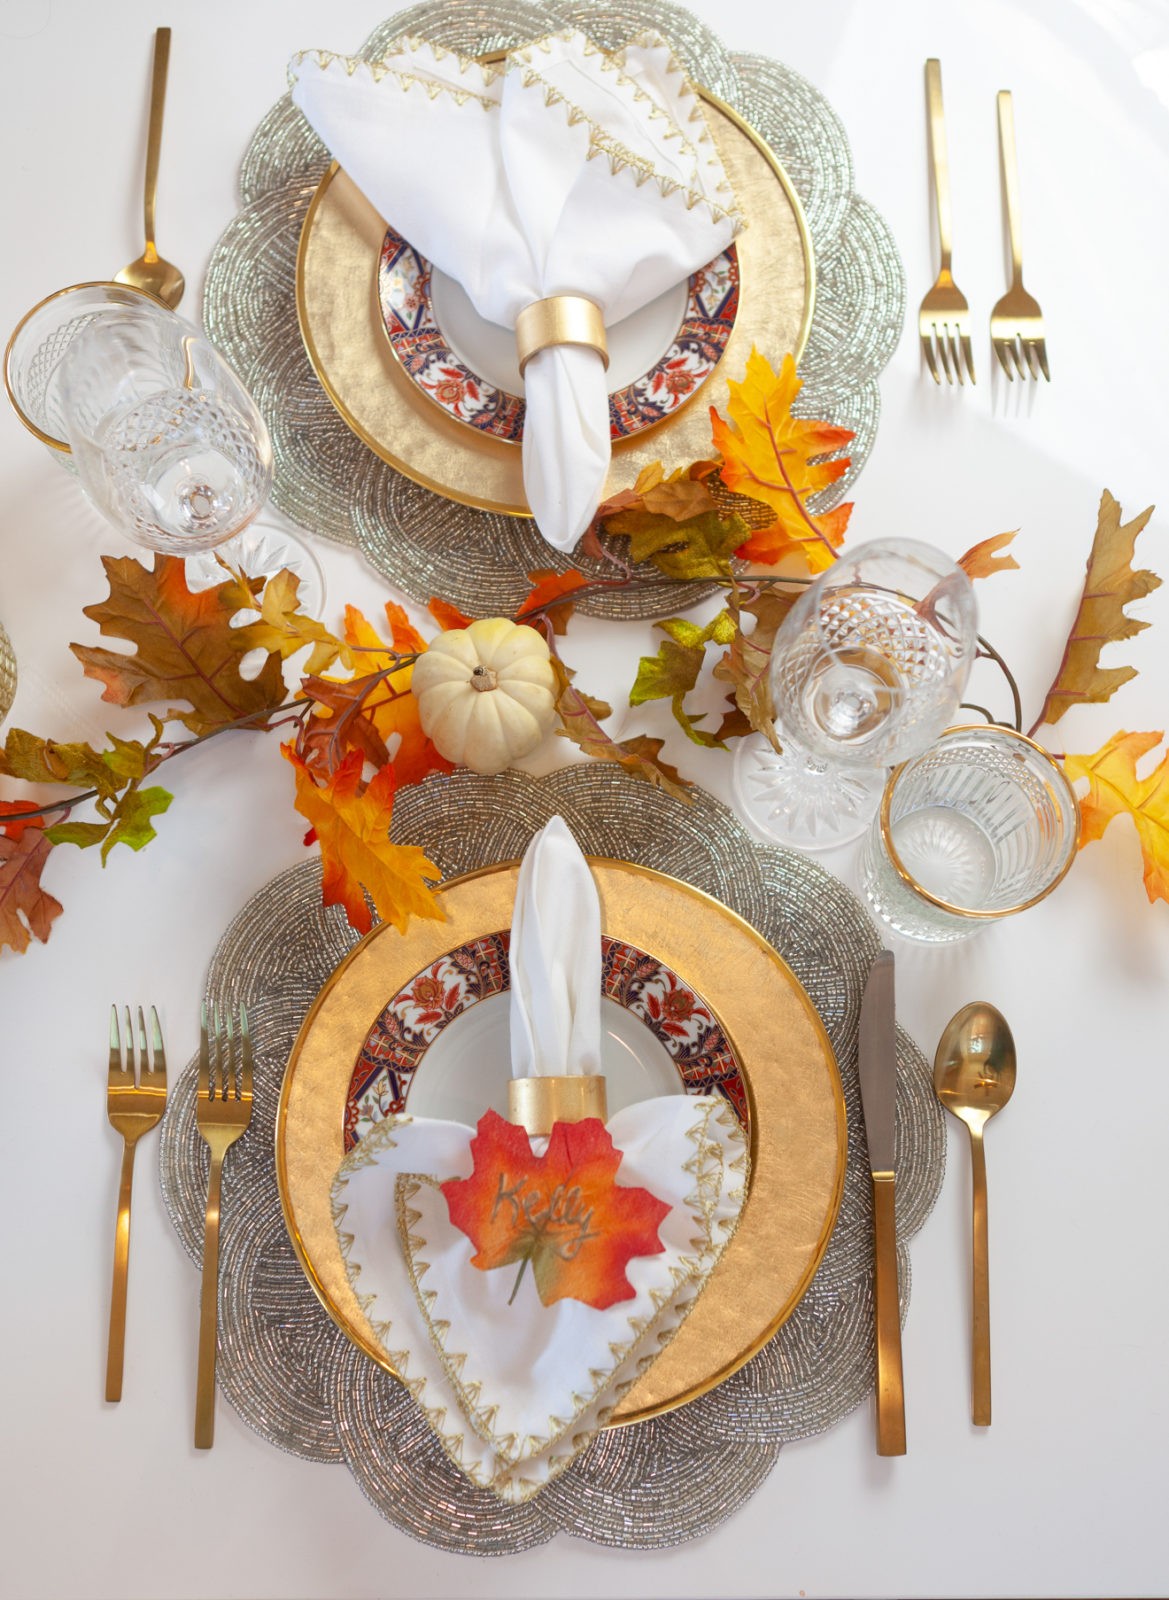 How to Create an Elegant Thanksgiving Table Setting by Home Decor Blogger Laura Lily, Thanksgiving decor ideas,